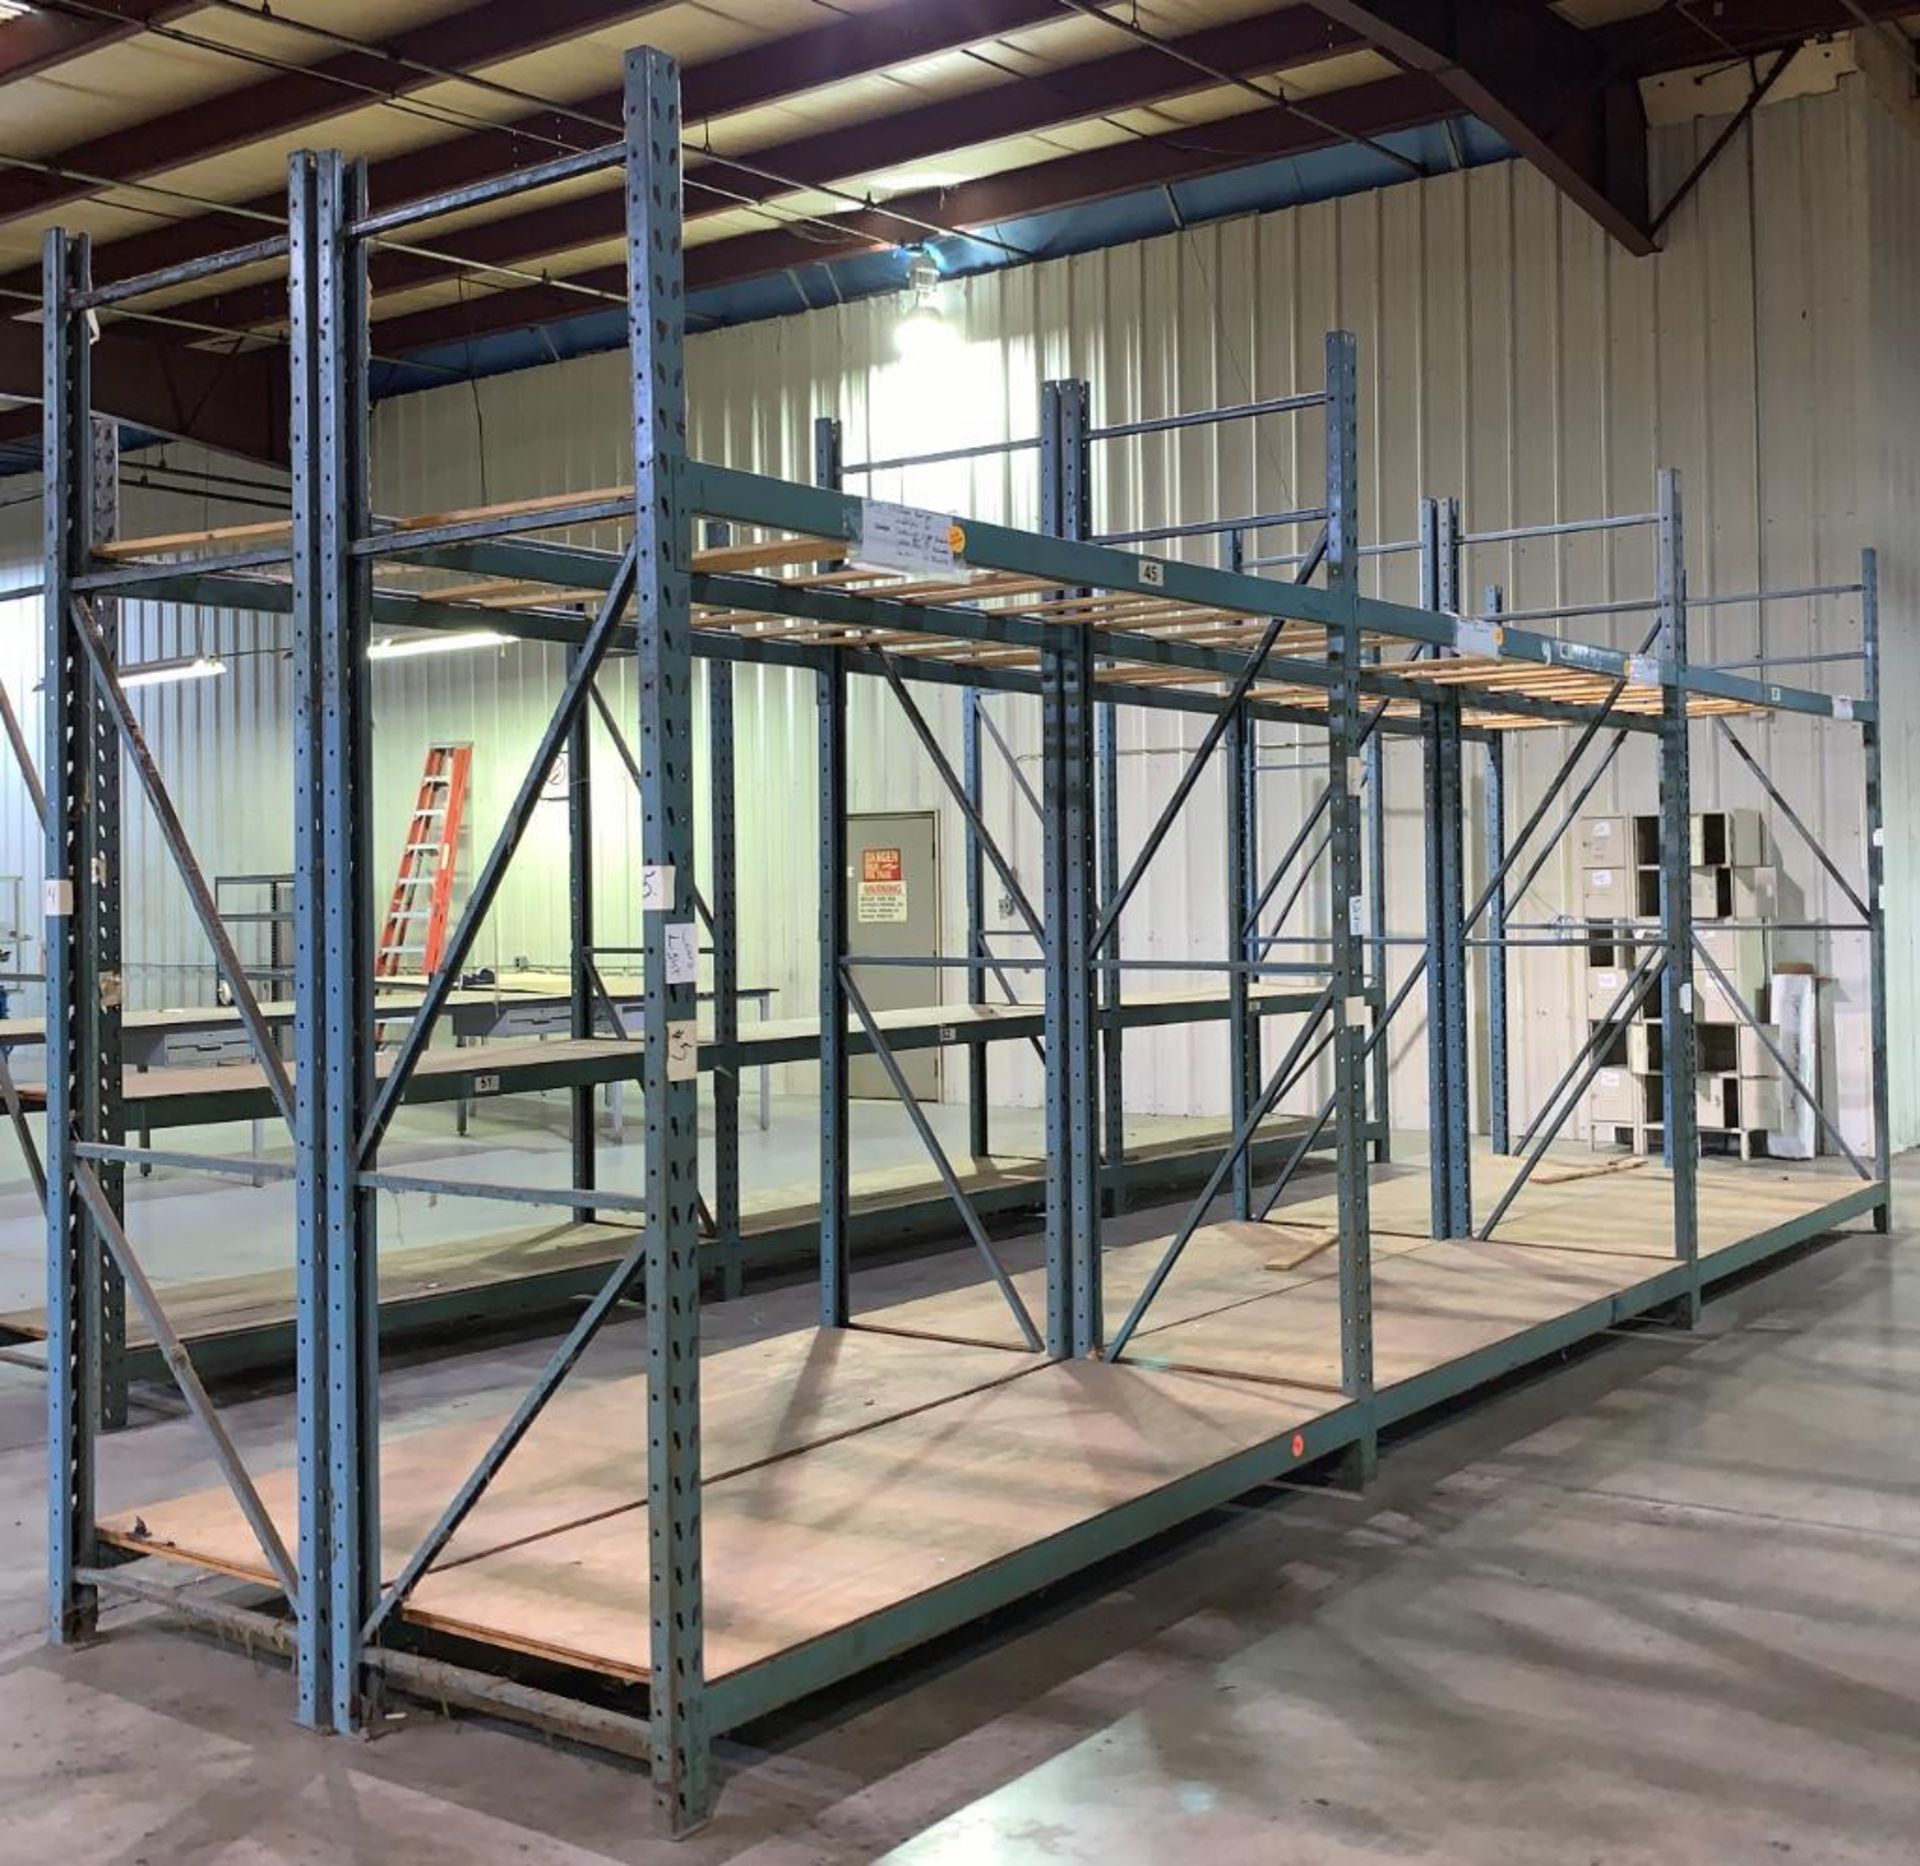 LOT: (6) Sections 8 ft. W x 4 ft. D x 10 ft H Pallet Rack (LOCATED IN MT. VERNON, IL)